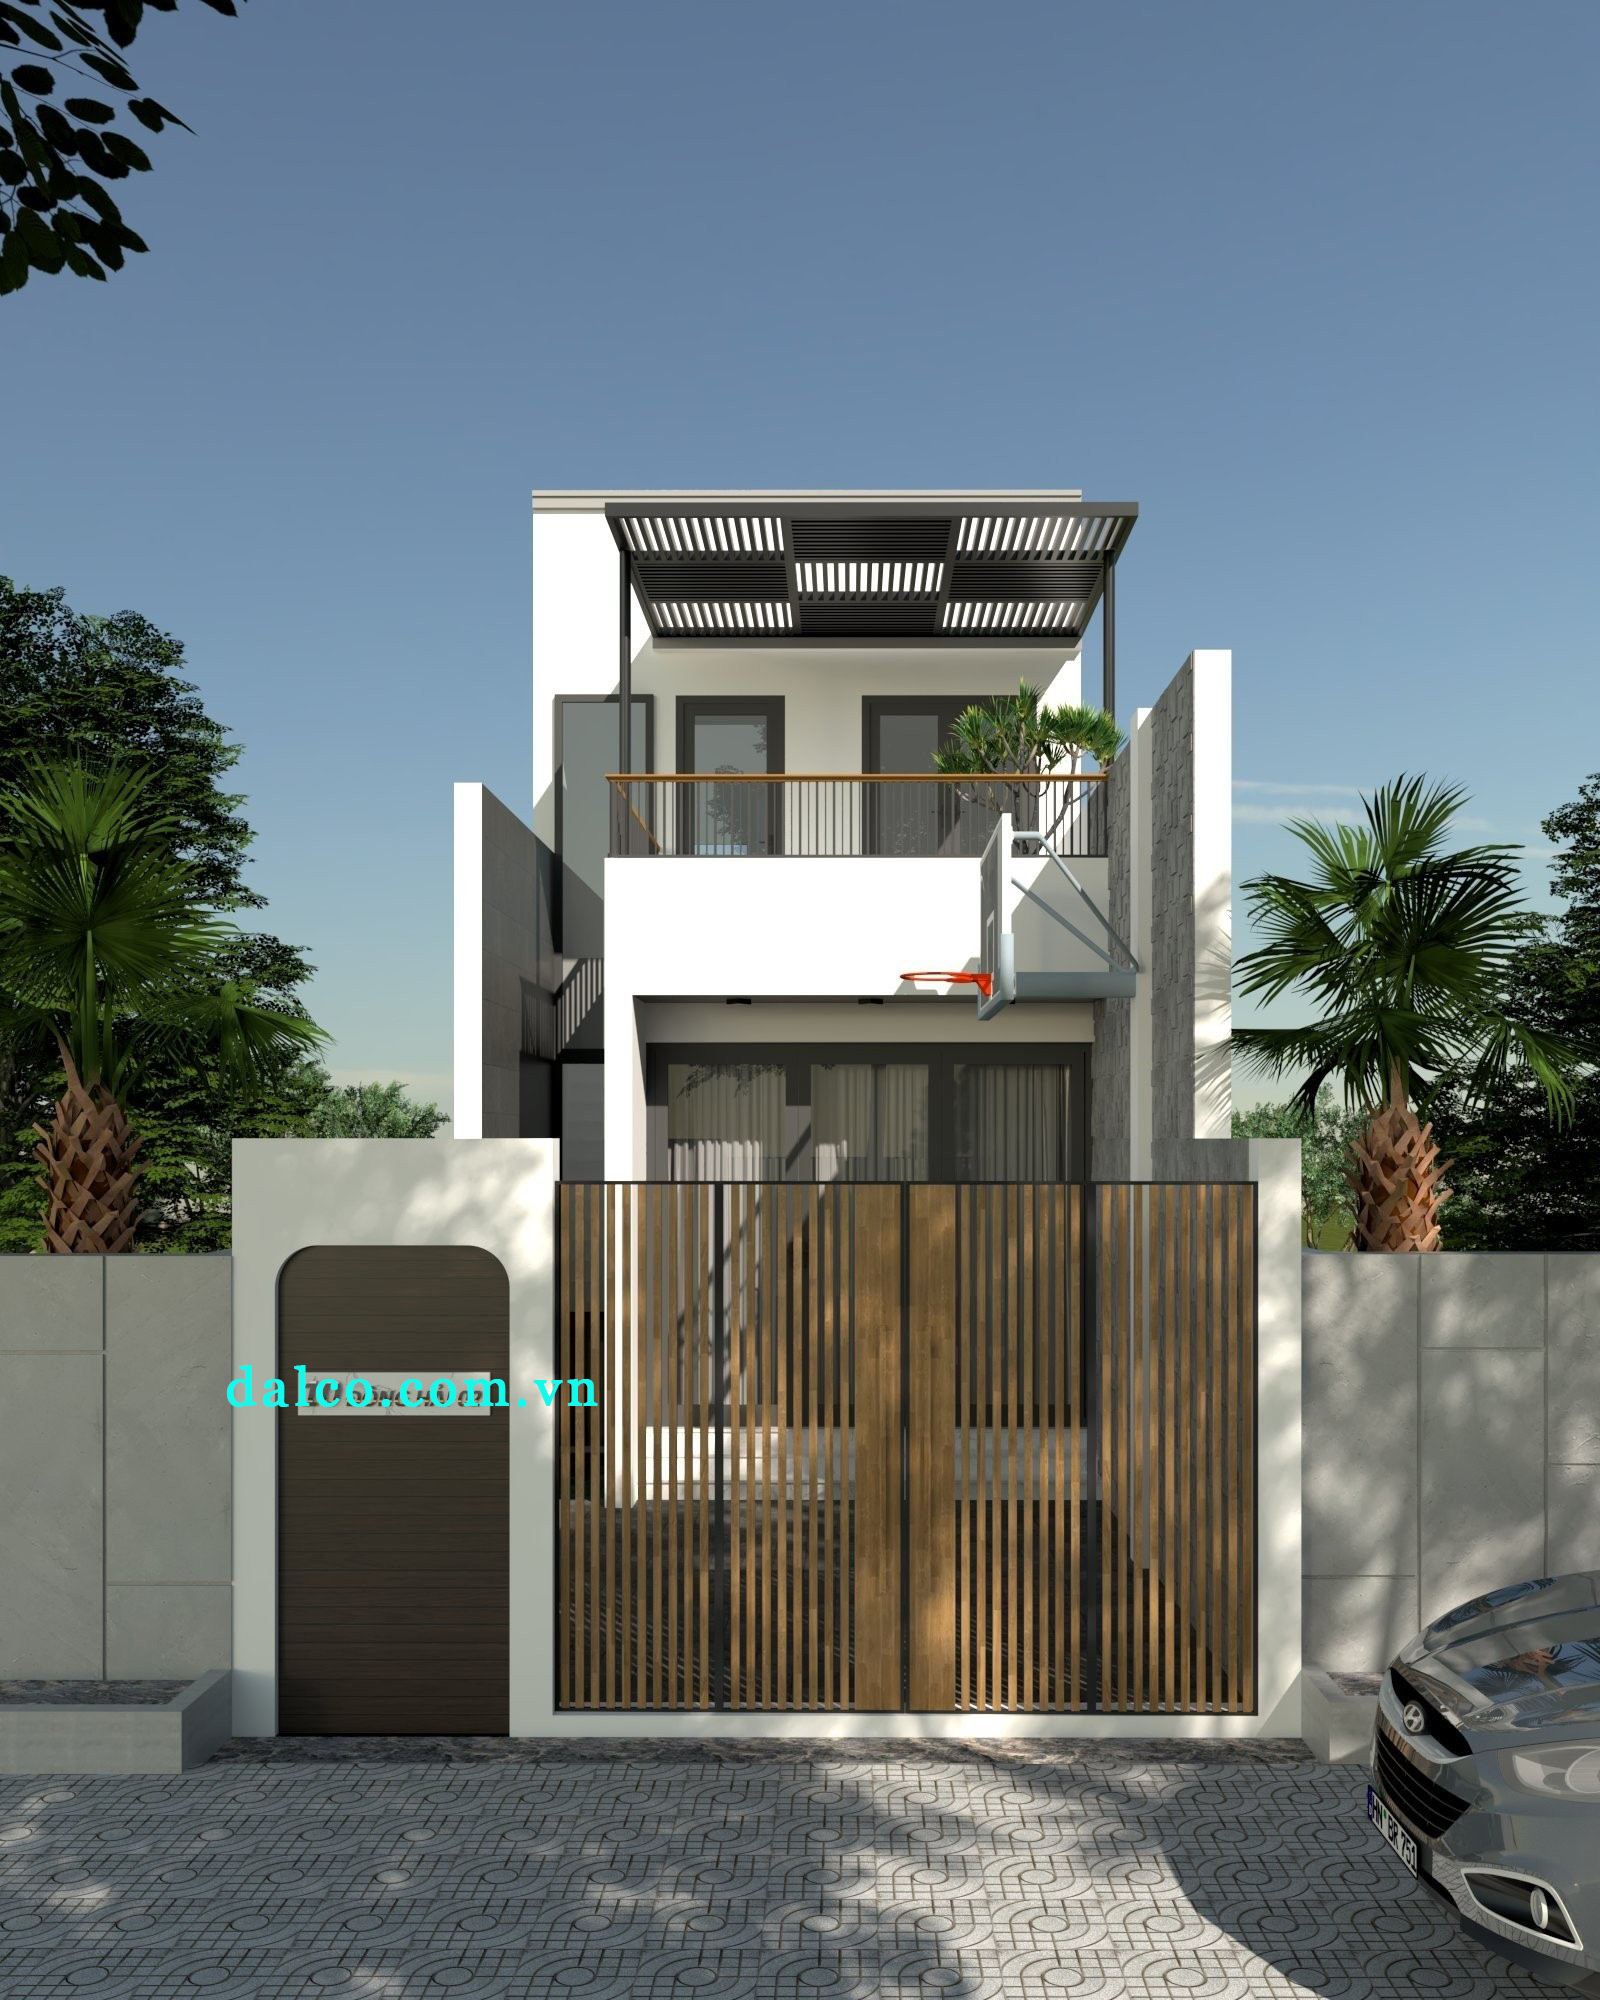 DALCO CONSTRUCTS THE FINISHING WORKS FOR FAMILY HOUSE 